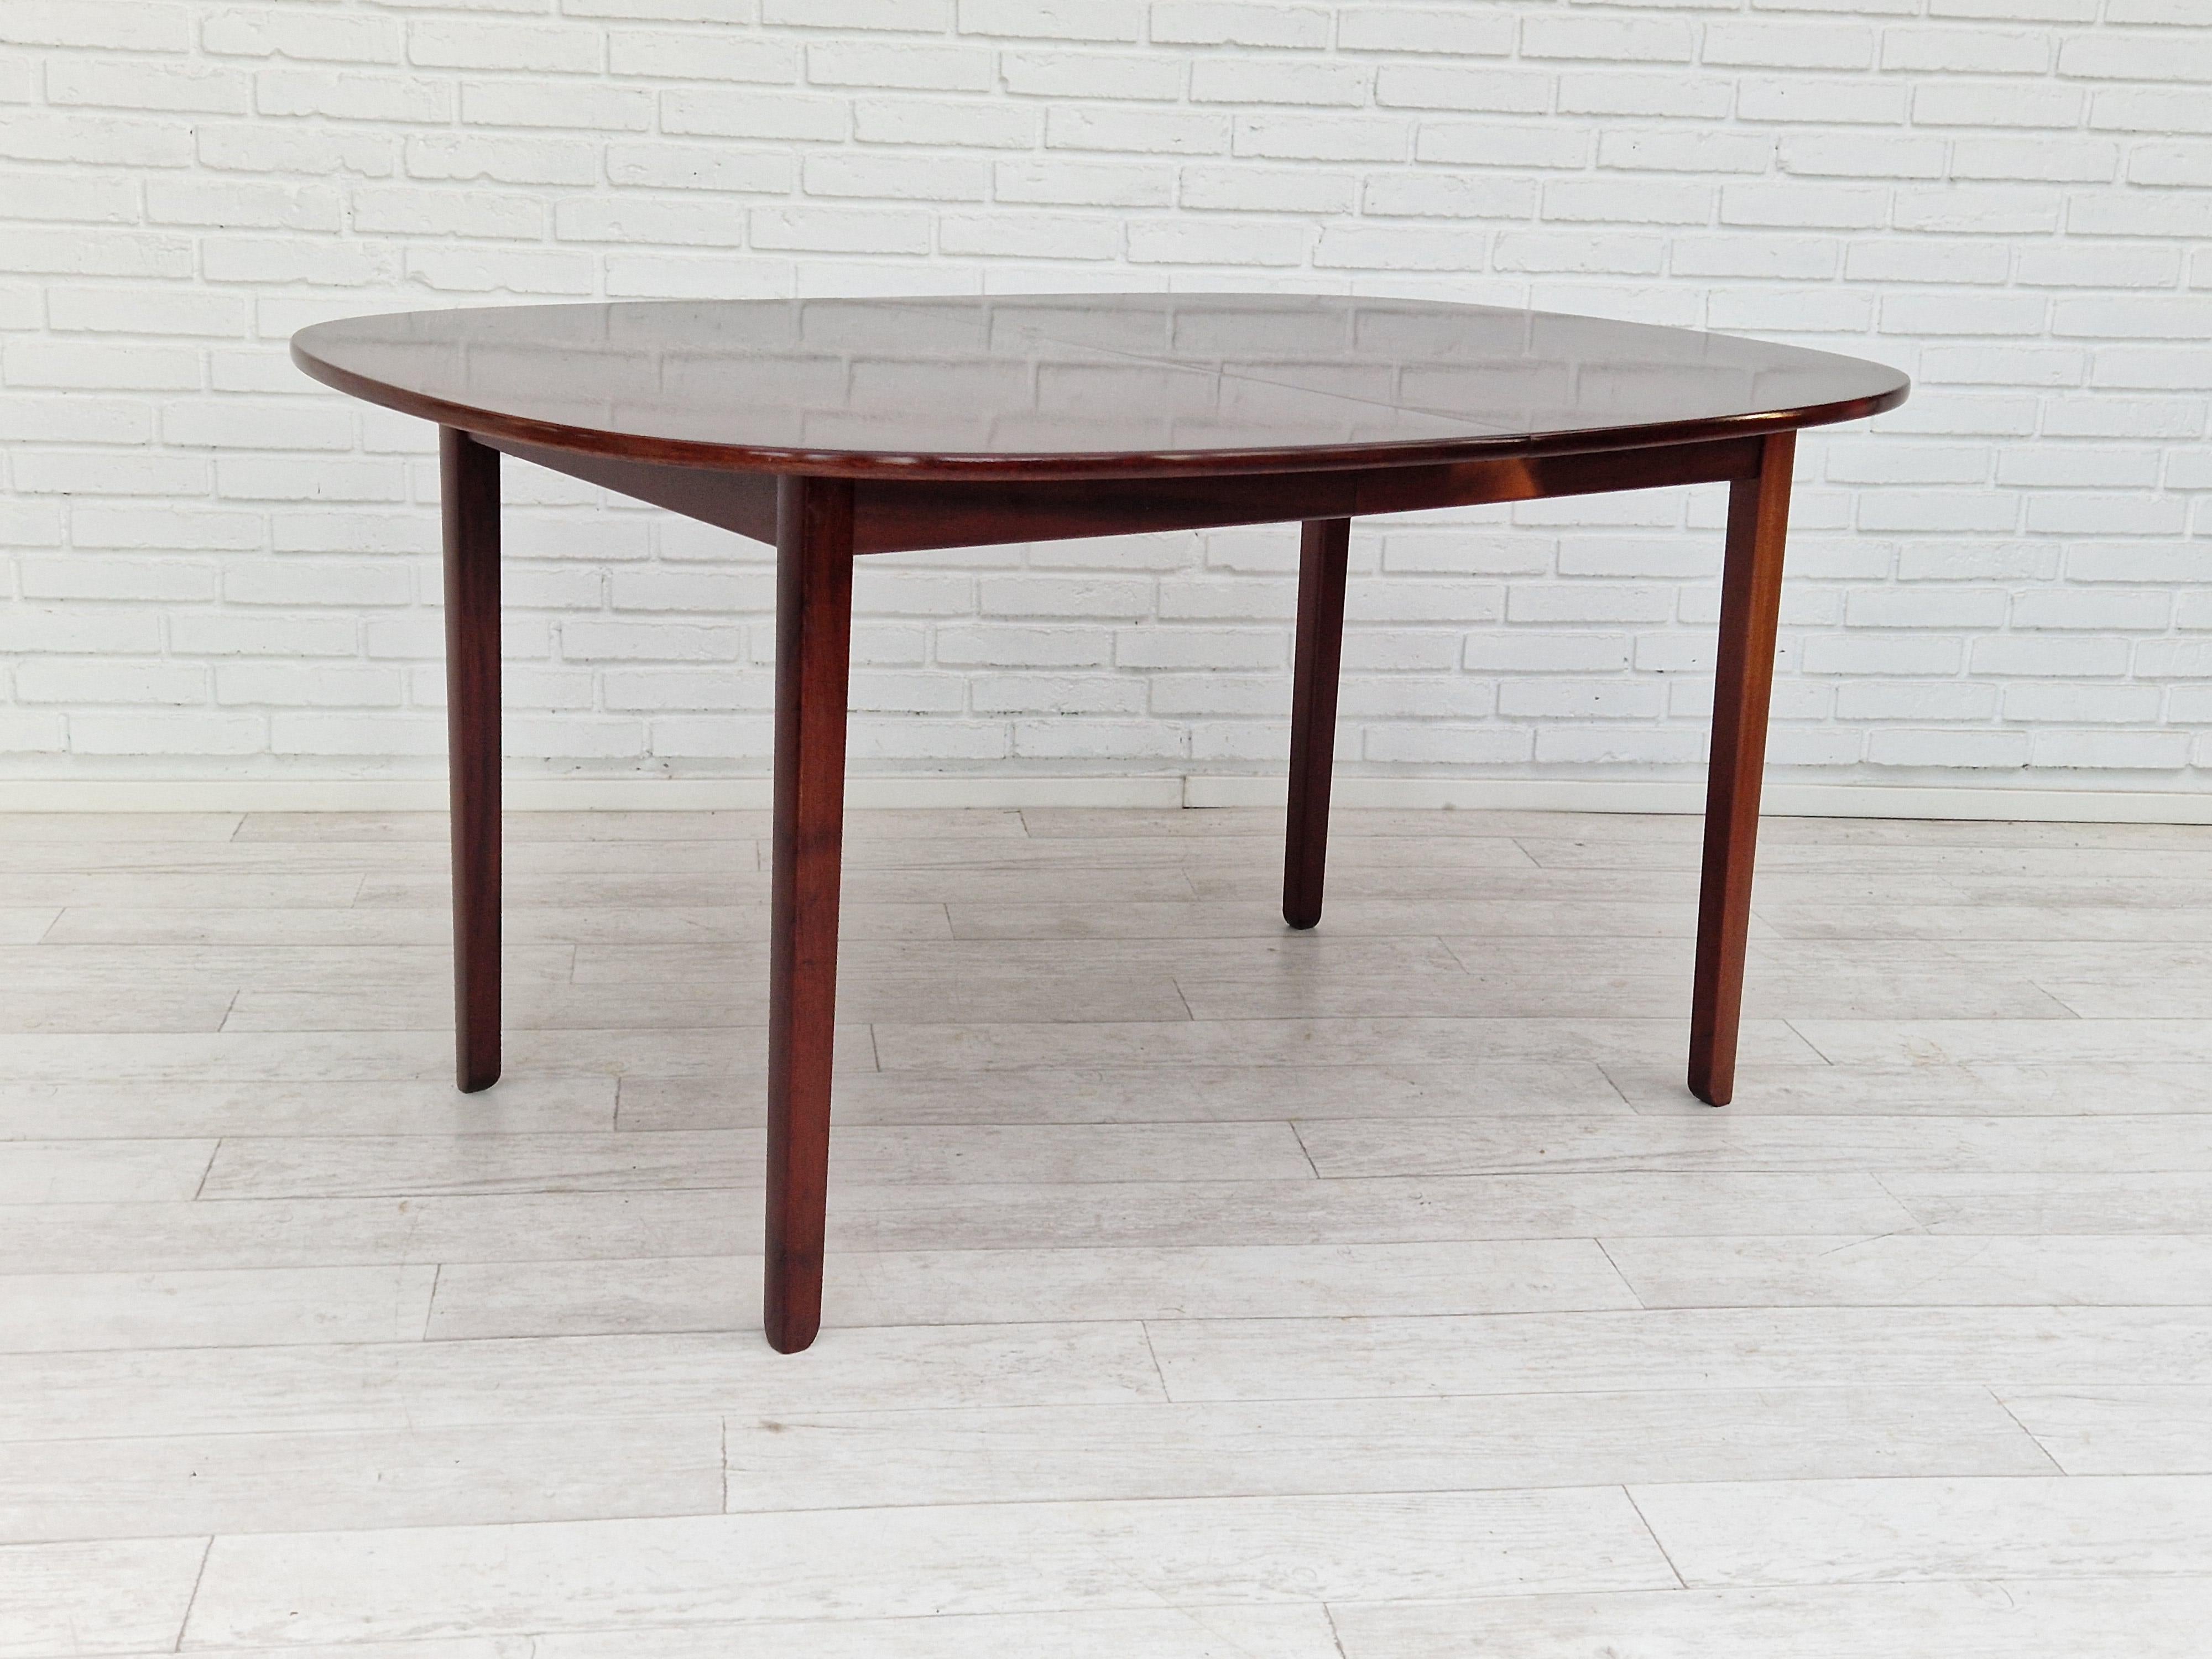 70s, Danish design by Ole Wanscher, dining table. 3